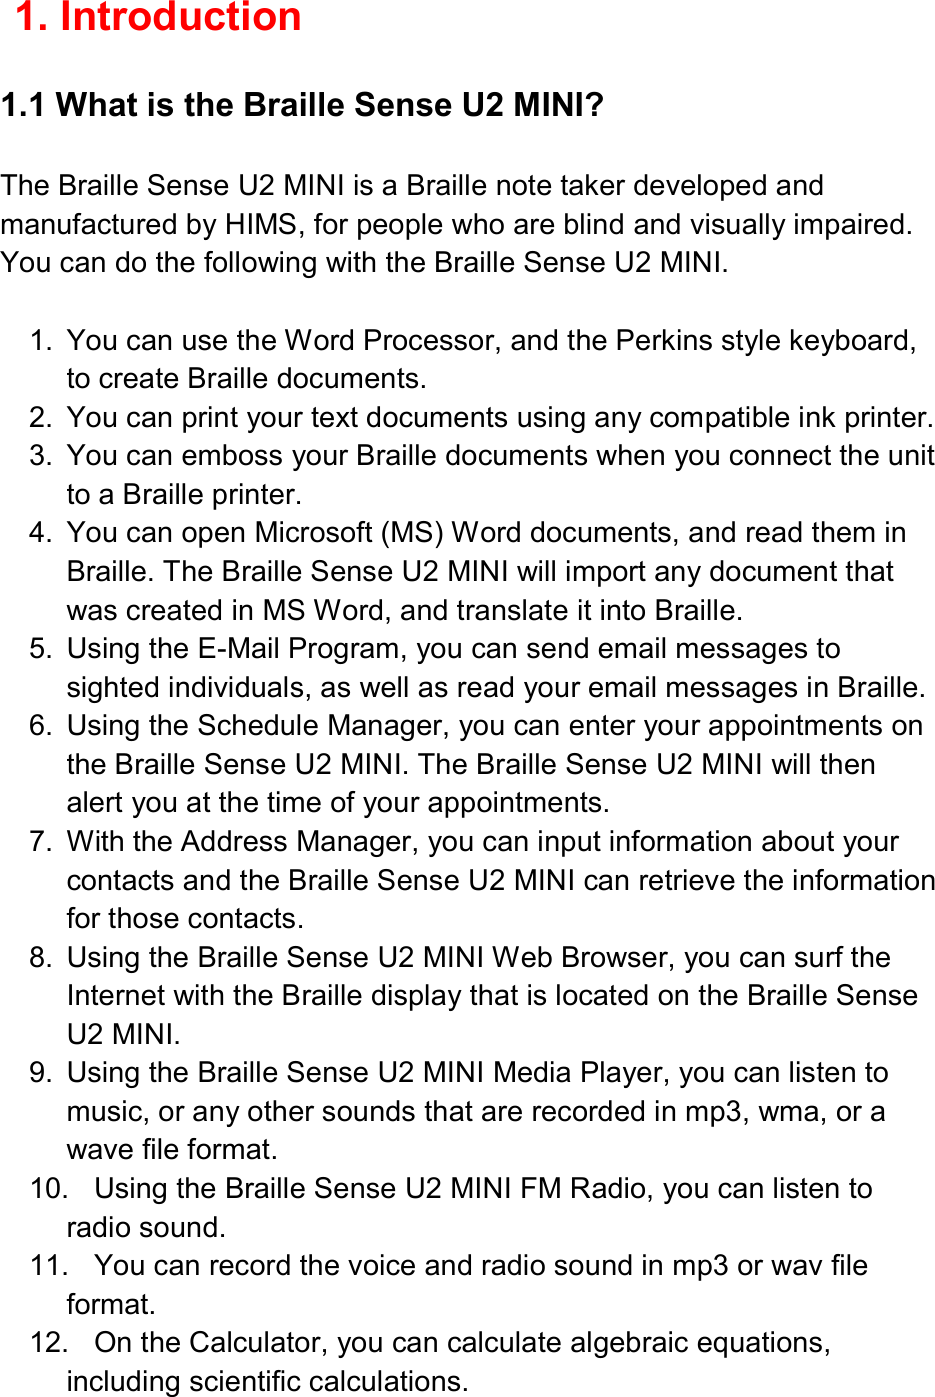  1. Introduction  1.1 What is the Braille Sense U2 MINI?  The Braille Sense U2 MINI is a Braille note taker developed and manufactured by HIMS, for people who are blind and visually impaired. You can do the following with the Braille Sense U2 MINI.  1.  You can use the Word Processor, and the Perkins style keyboard, to create Braille documents. 2.  You can print your text documents using any compatible ink printer. 3.  You can emboss your Braille documents when you connect the unit to a Braille printer. 4.  You can open Microsoft (MS) Word documents, and read them in Braille. The Braille Sense U2 MINI will import any document that was created in MS Word, and translate it into Braille. 5.  Using the E-Mail Program, you can send email messages to sighted individuals, as well as read your email messages in Braille. 6.  Using the Schedule Manager, you can enter your appointments on the Braille Sense U2 MINI. The Braille Sense U2 MINI will then alert you at the time of your appointments. 7.  With the Address Manager, you can input information about your contacts and the Braille Sense U2 MINI can retrieve the information for those contacts. 8.  Using the Braille Sense U2 MINI Web Browser, you can surf the Internet with the Braille display that is located on the Braille Sense U2 MINI. 9.  Using the Braille Sense U2 MINI Media Player, you can listen to music, or any other sounds that are recorded in mp3, wma, or a wave file format. 10.  Using the Braille Sense U2 MINI FM Radio, you can listen to radio sound. 11.  You can record the voice and radio sound in mp3 or wav file format. 12.  On the Calculator, you can calculate algebraic equations, including scientific calculations. 